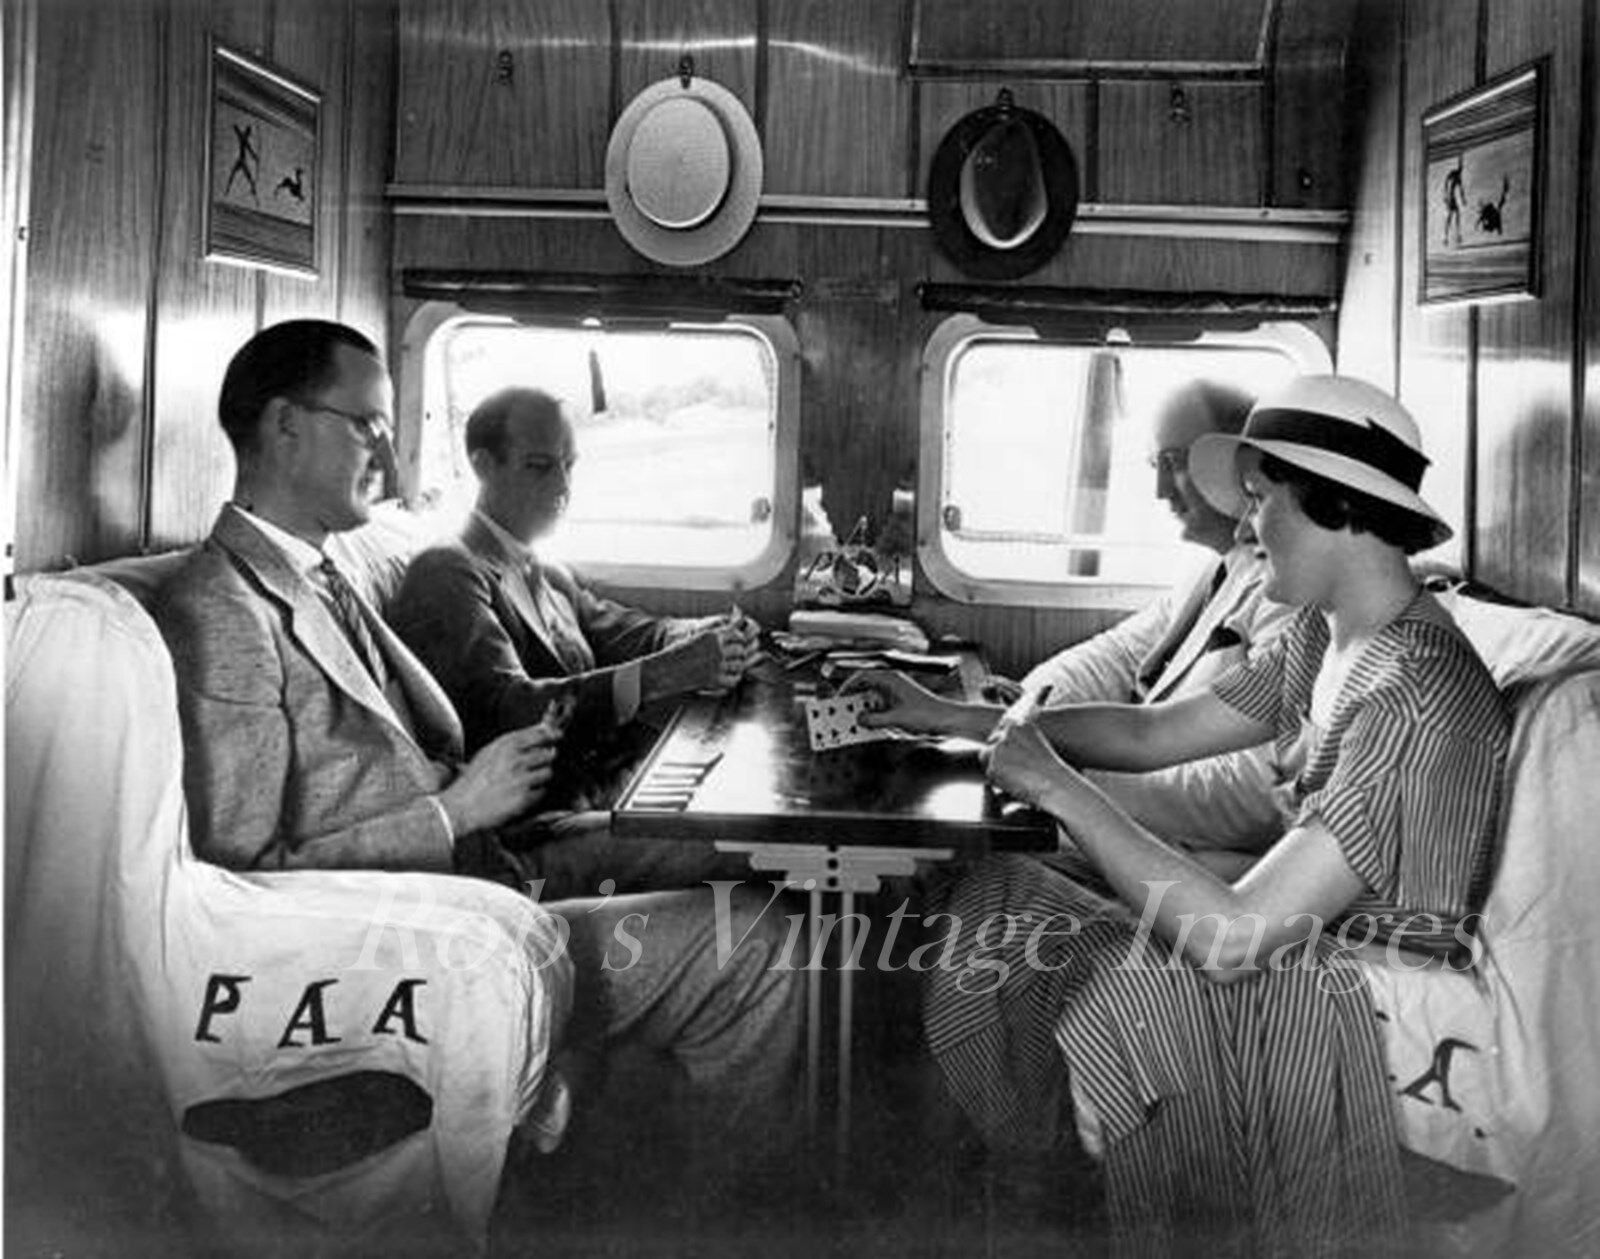  Pan Am Clipper Sikorsky S-42 Airplane Interior Flying Boat 1935 photo   